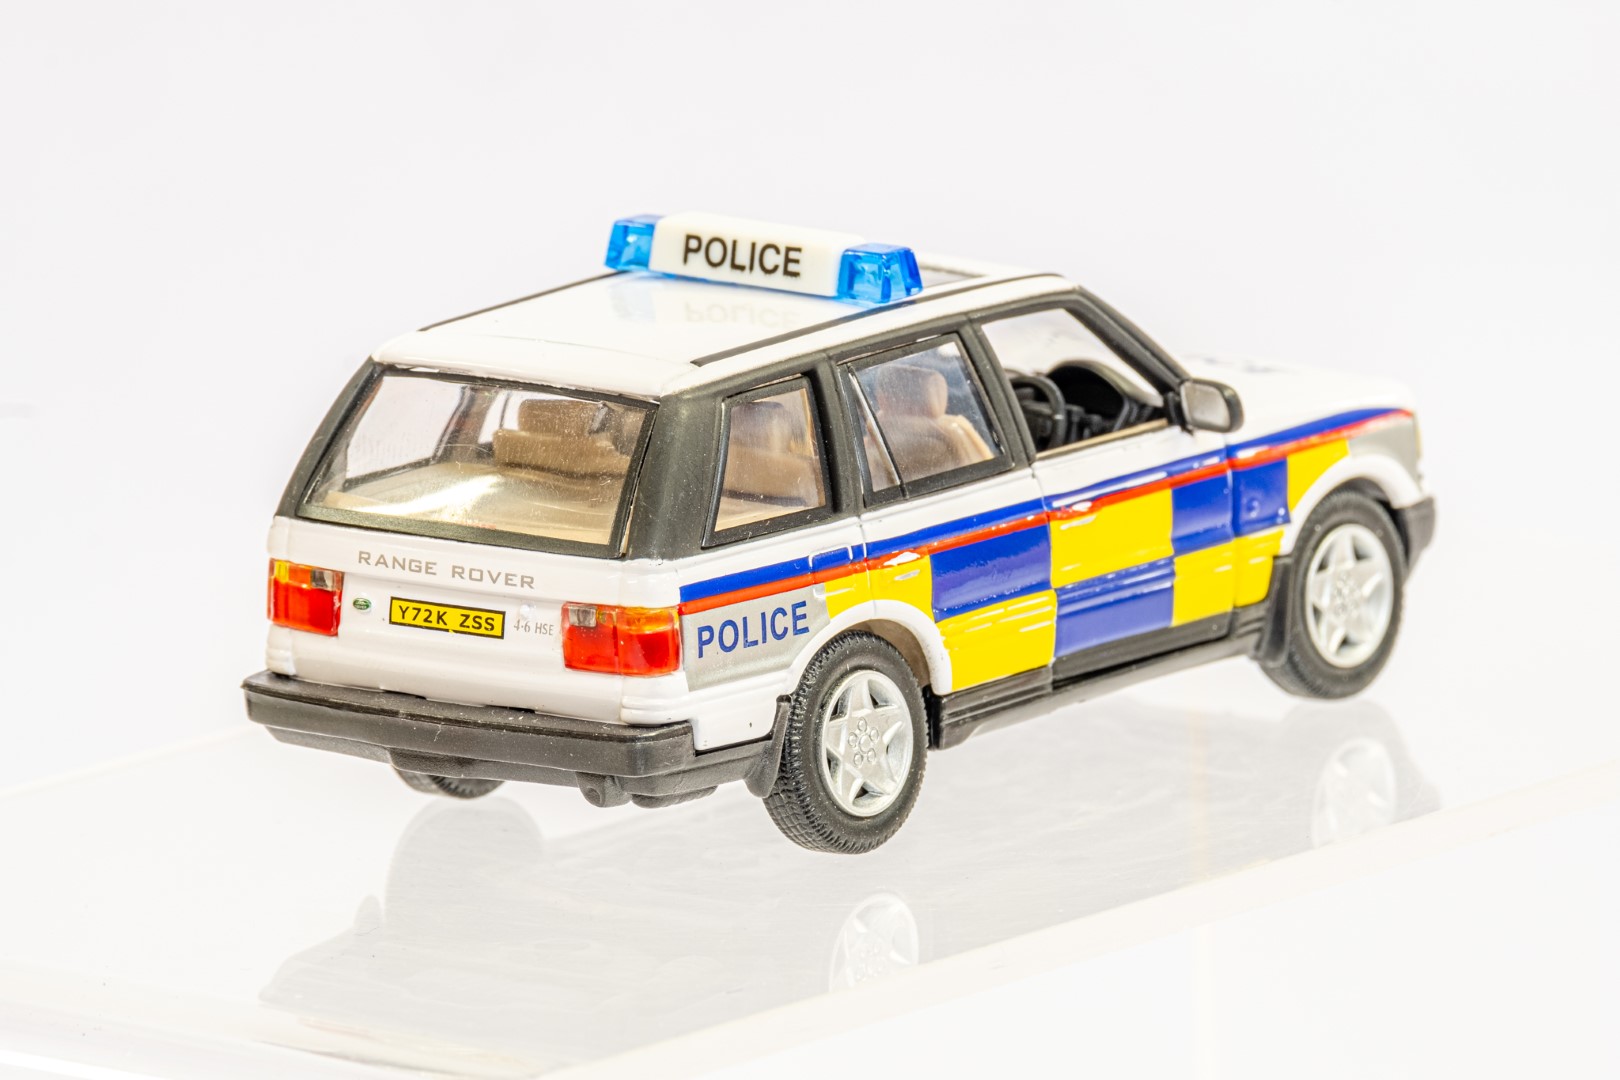 Automax Range Rover 4.8 HSE - Police - Image 6 of 7